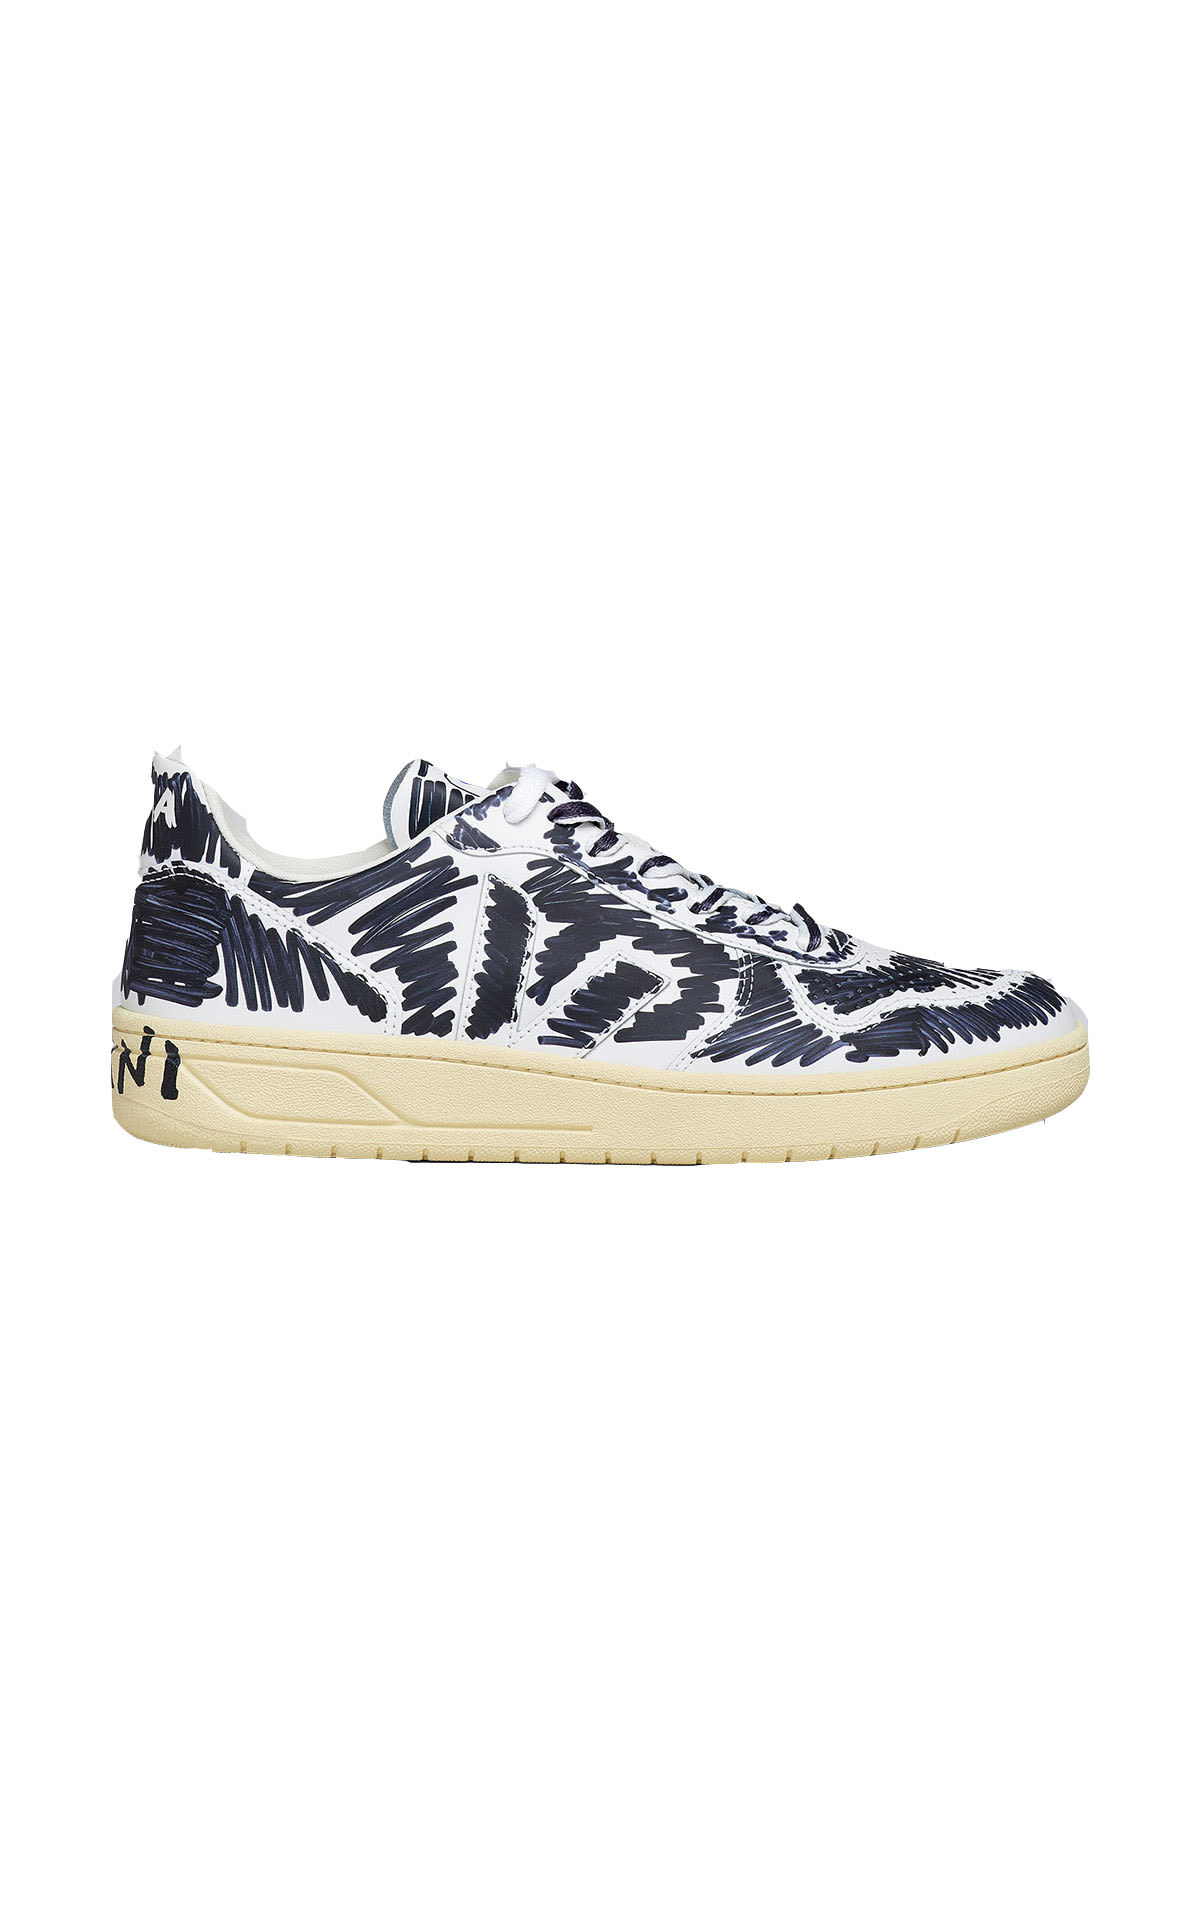 Marni V-10 Veja x Marni low top black and white from Bicester Village